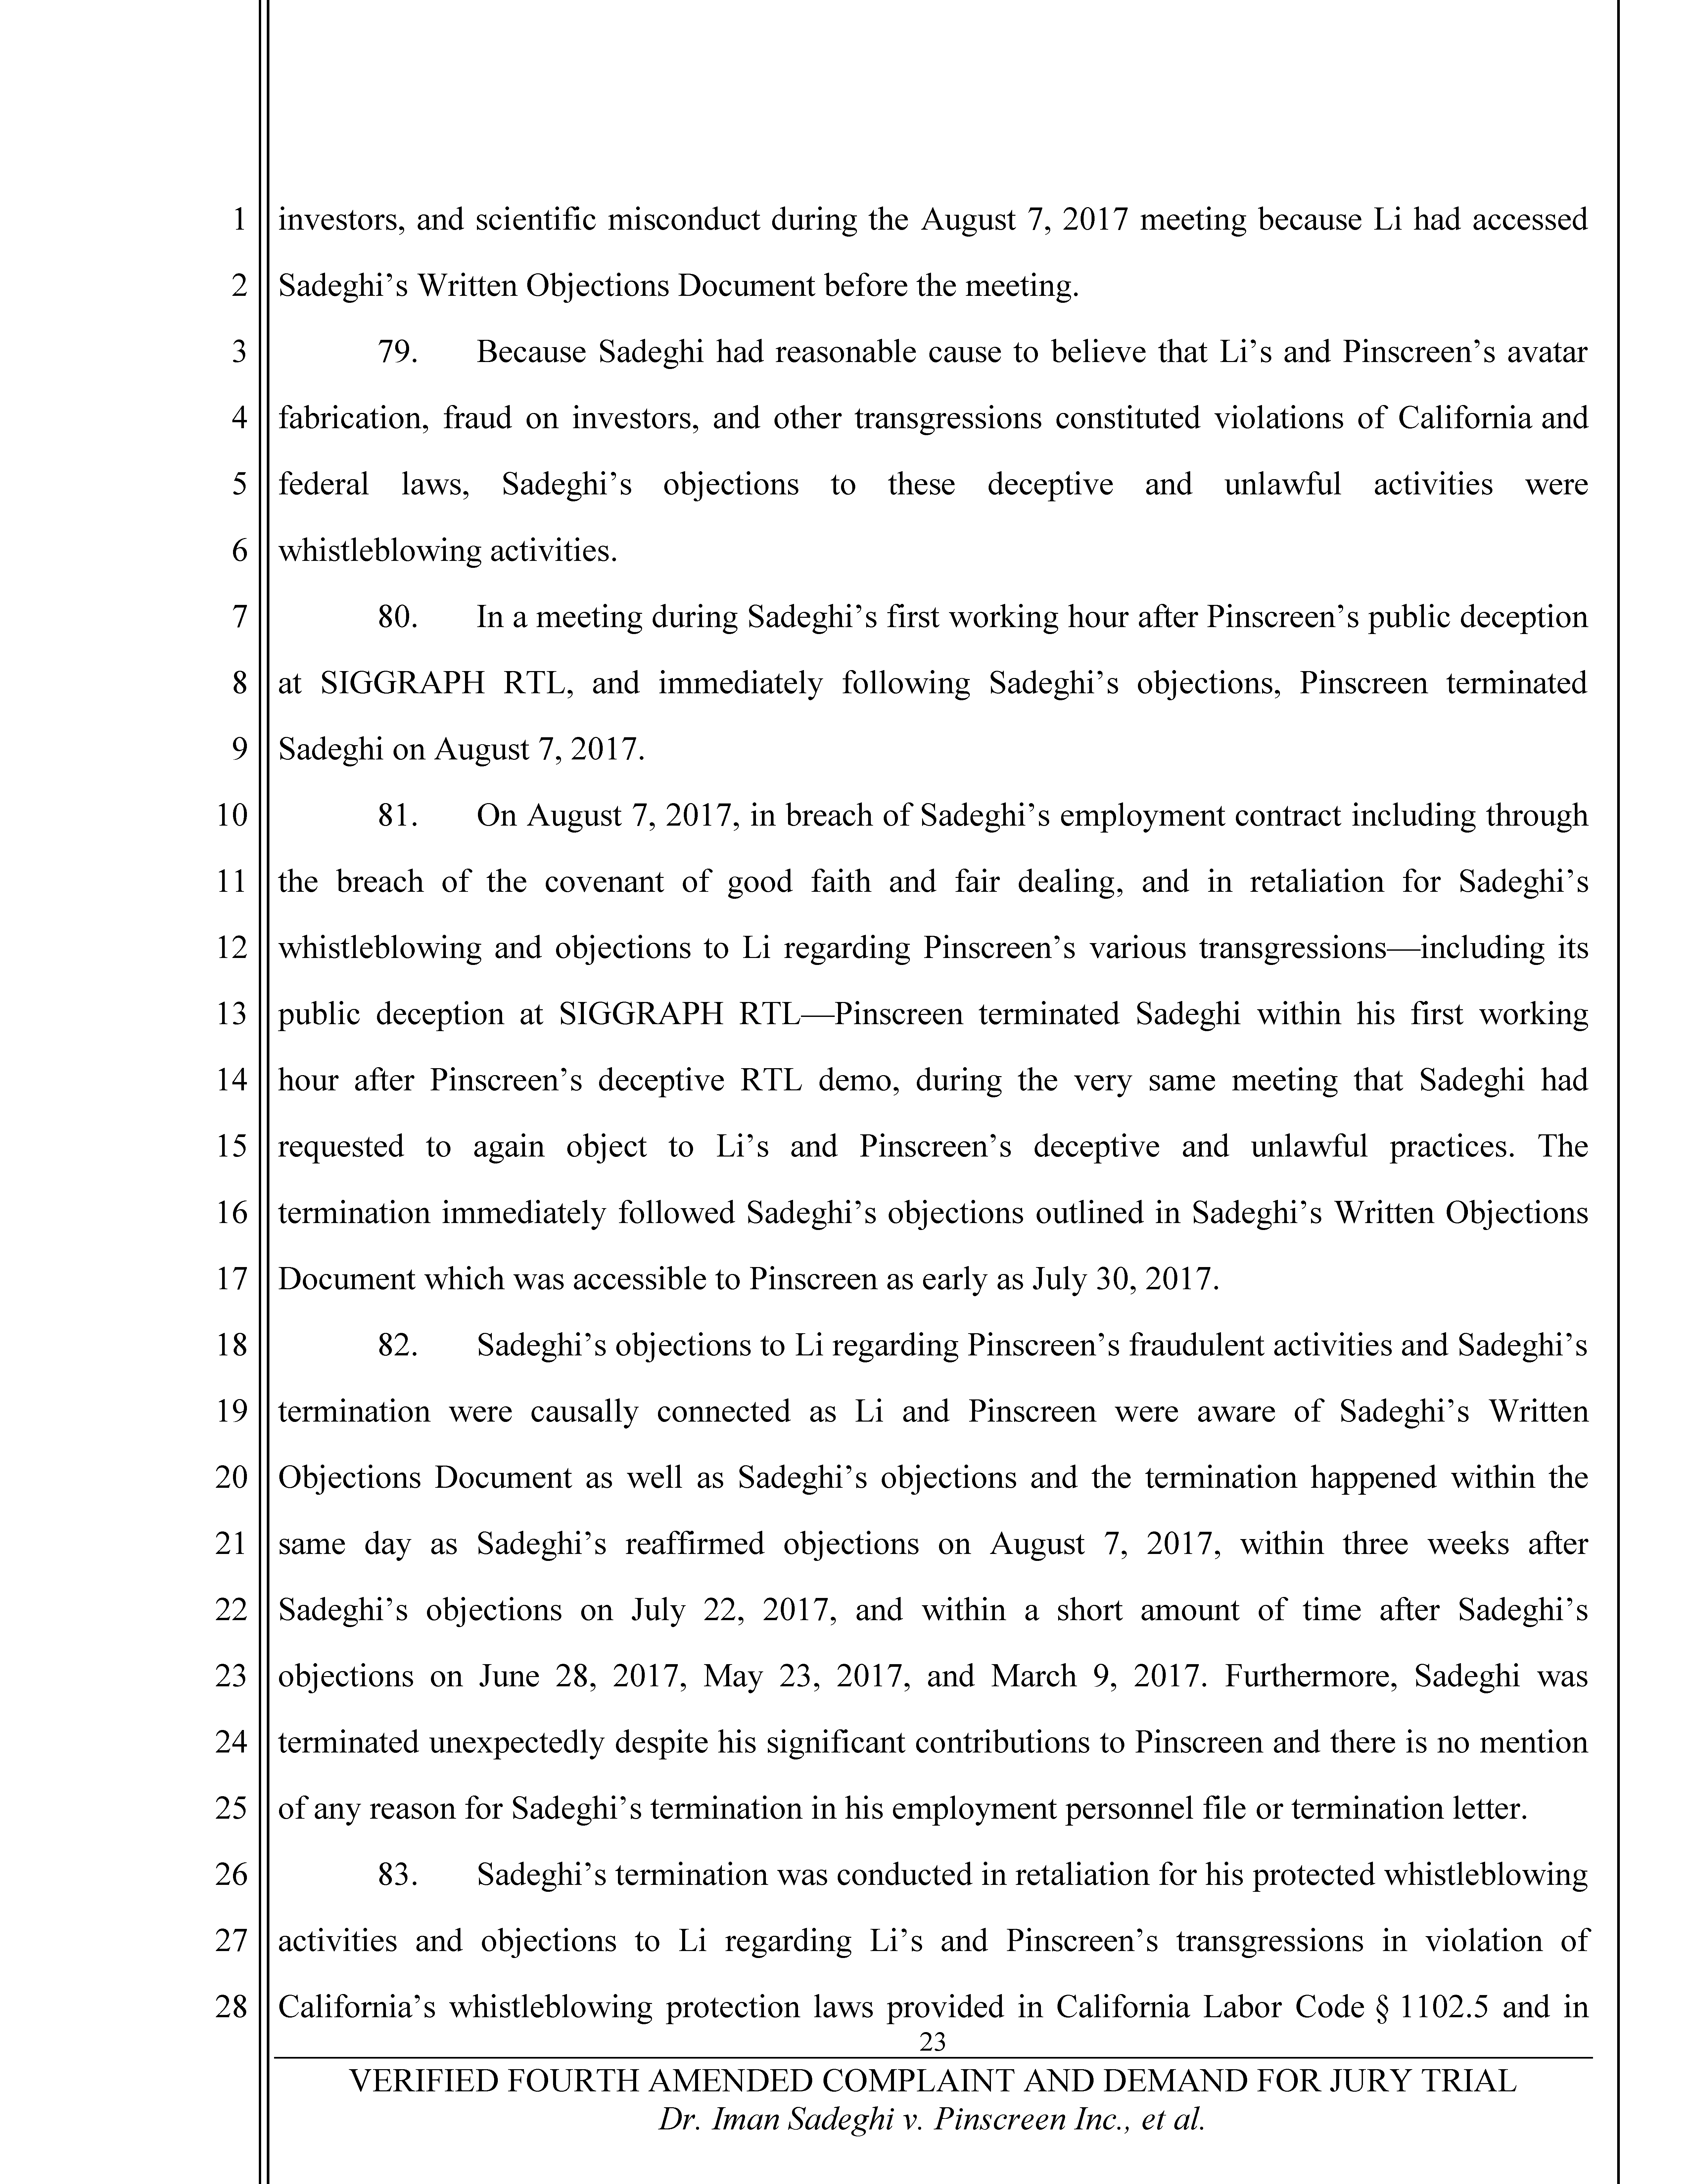 Fourth Amended Complaint (4AC) Page 24